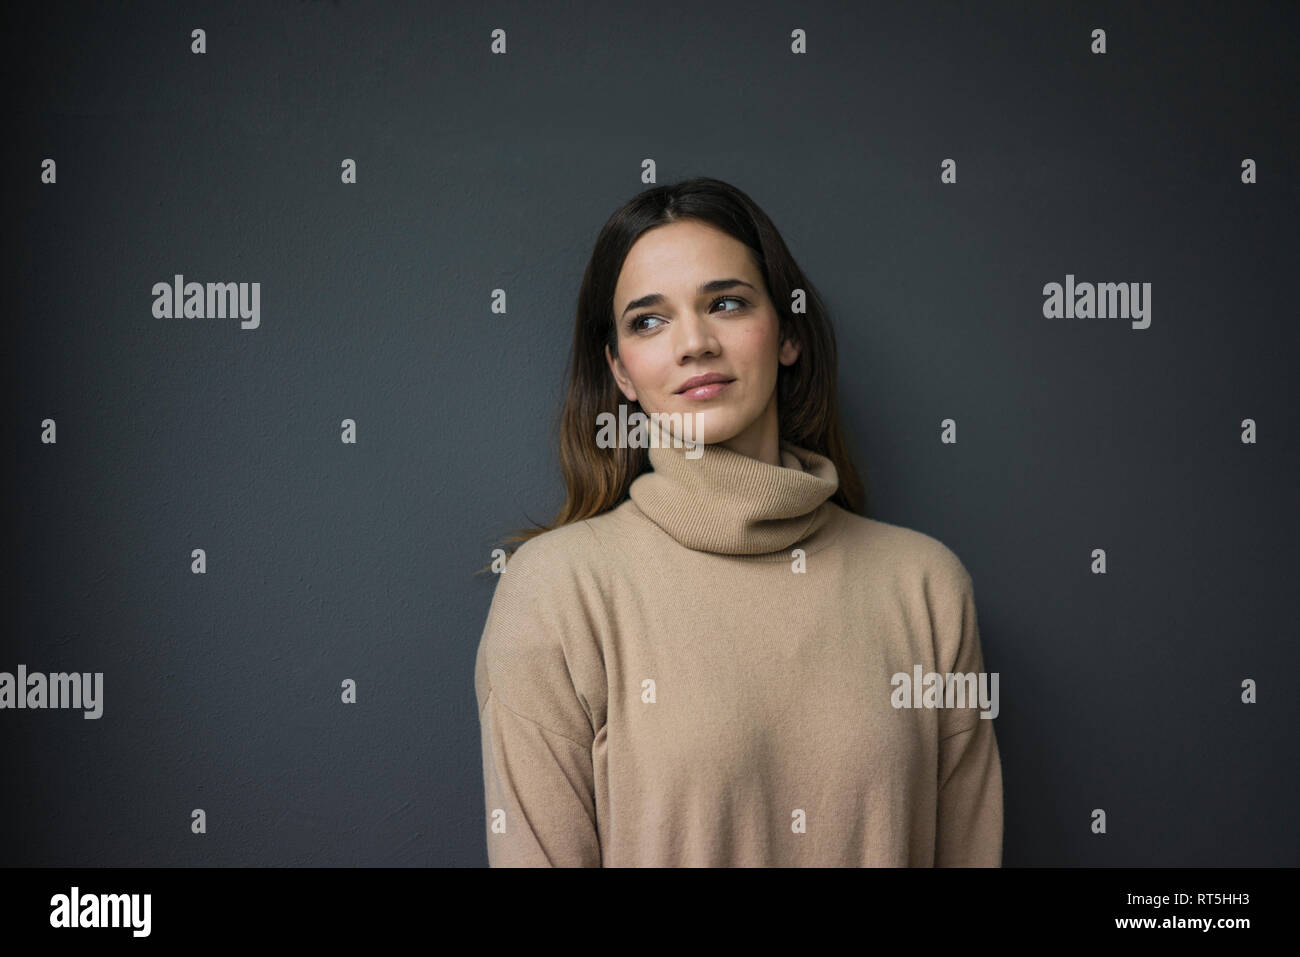 Portrait of smiling woman wearing light brown turtleneck pullover leaning against grey wall Stock Photo